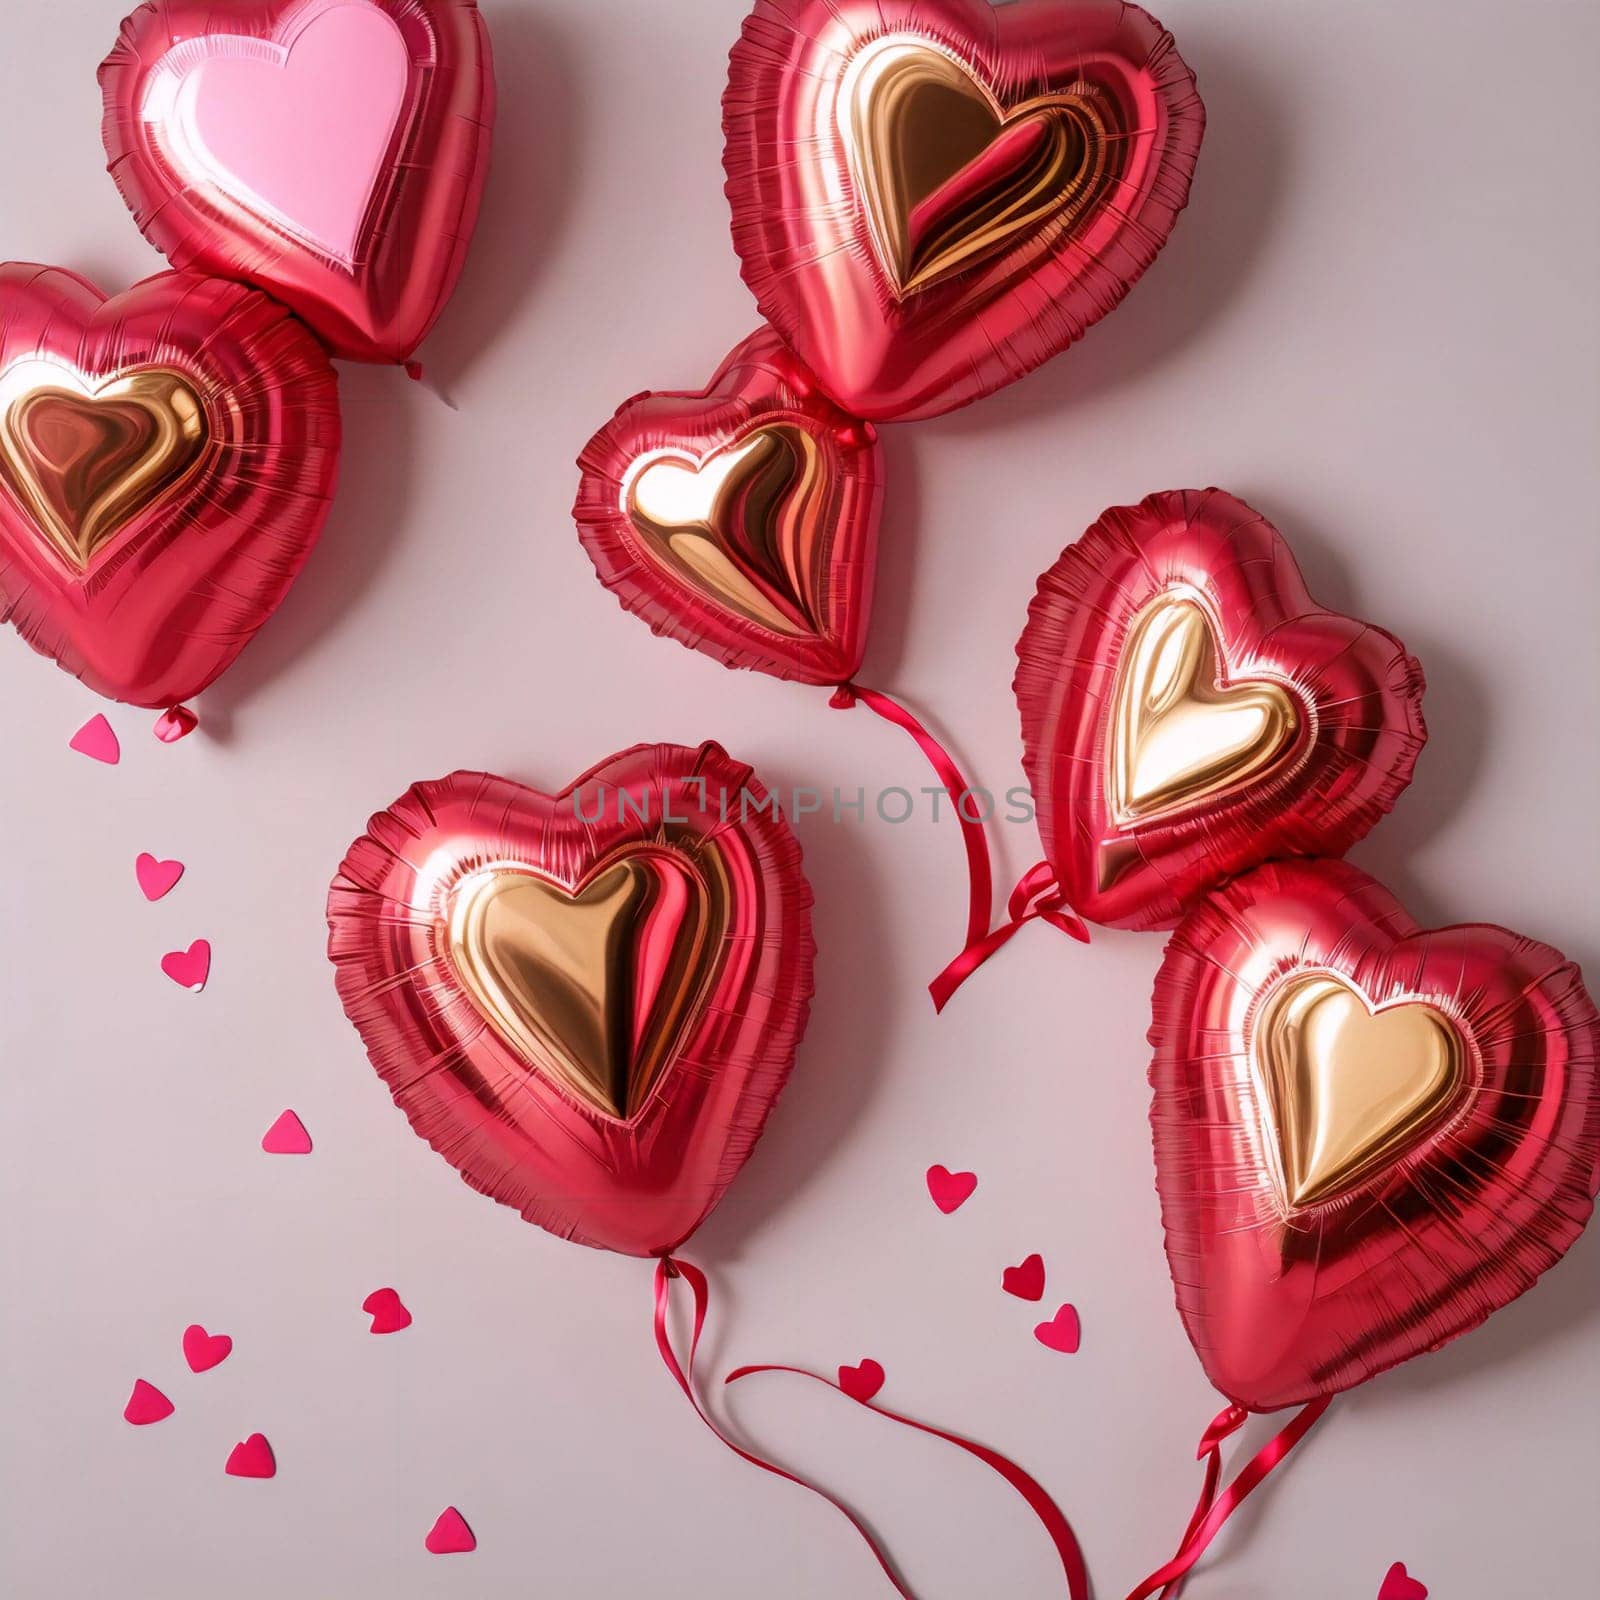 hearts made of red and gold foil on a pink background by Севостьянов